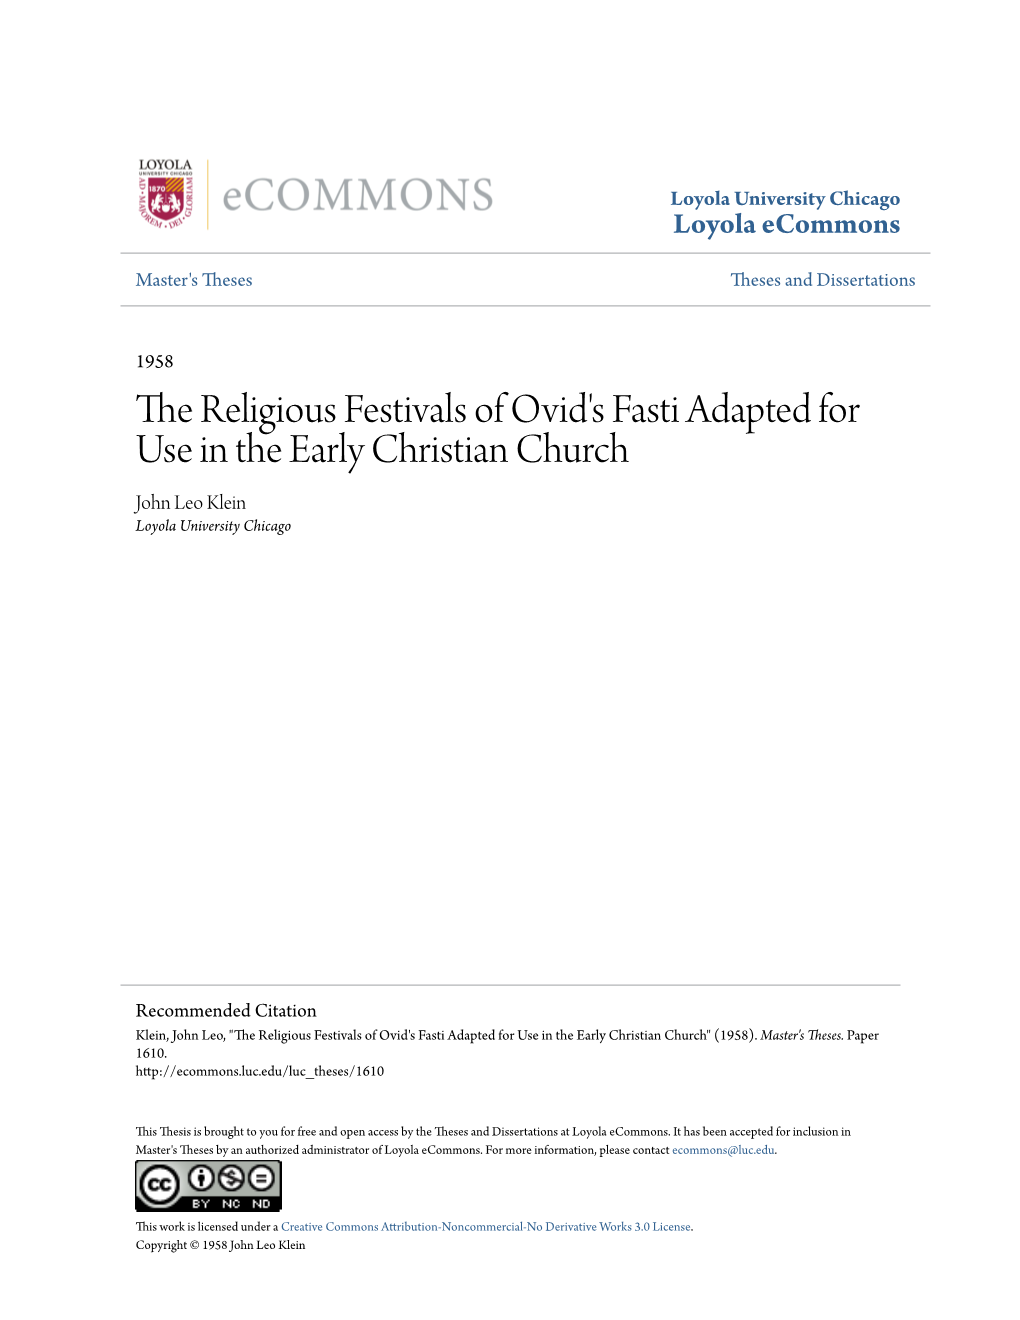 The Religious Festivals of Ovid's Fasti Adapted for Use in the Early Christian Church John Leo Klein Loyola University Chicago